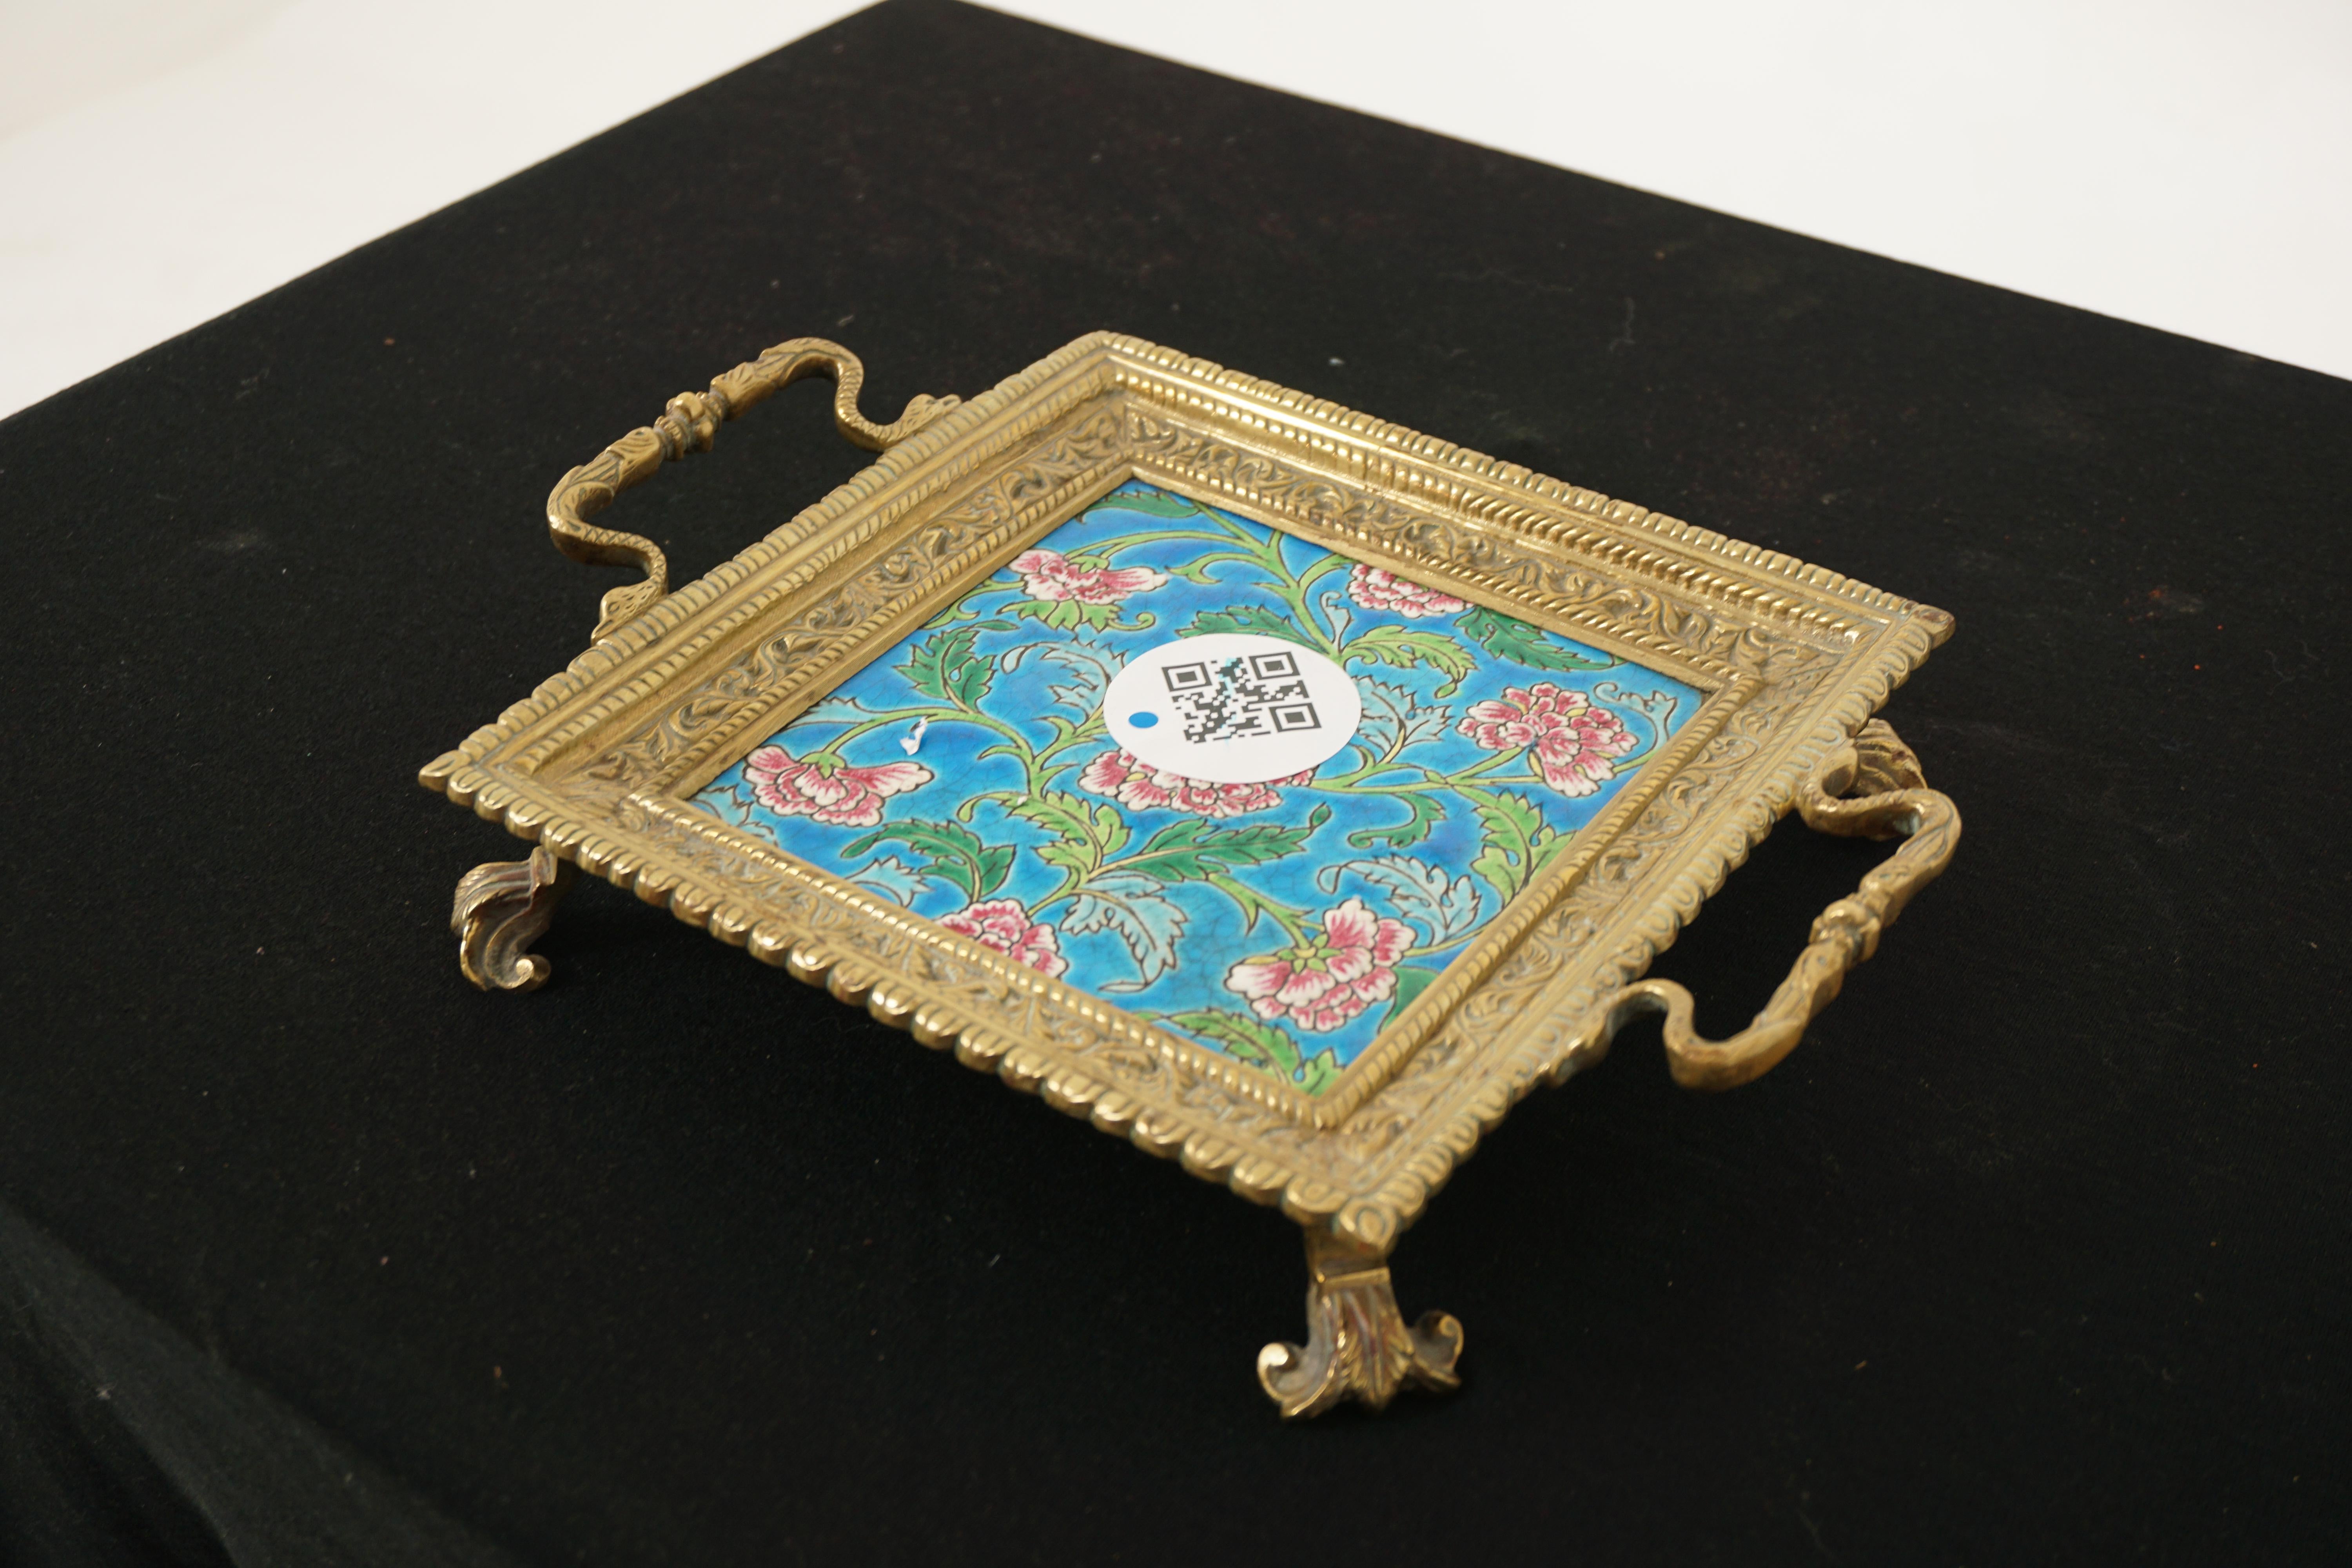 Antique Victorian brass trivet, stand, tray Majolica Plate, England 1890, H57

Solid brass
Majolica tile
Square brass shape with Majolica tile
Ornate decoration with snake shaped handles
Has Regency style feet on the base
All solid with no